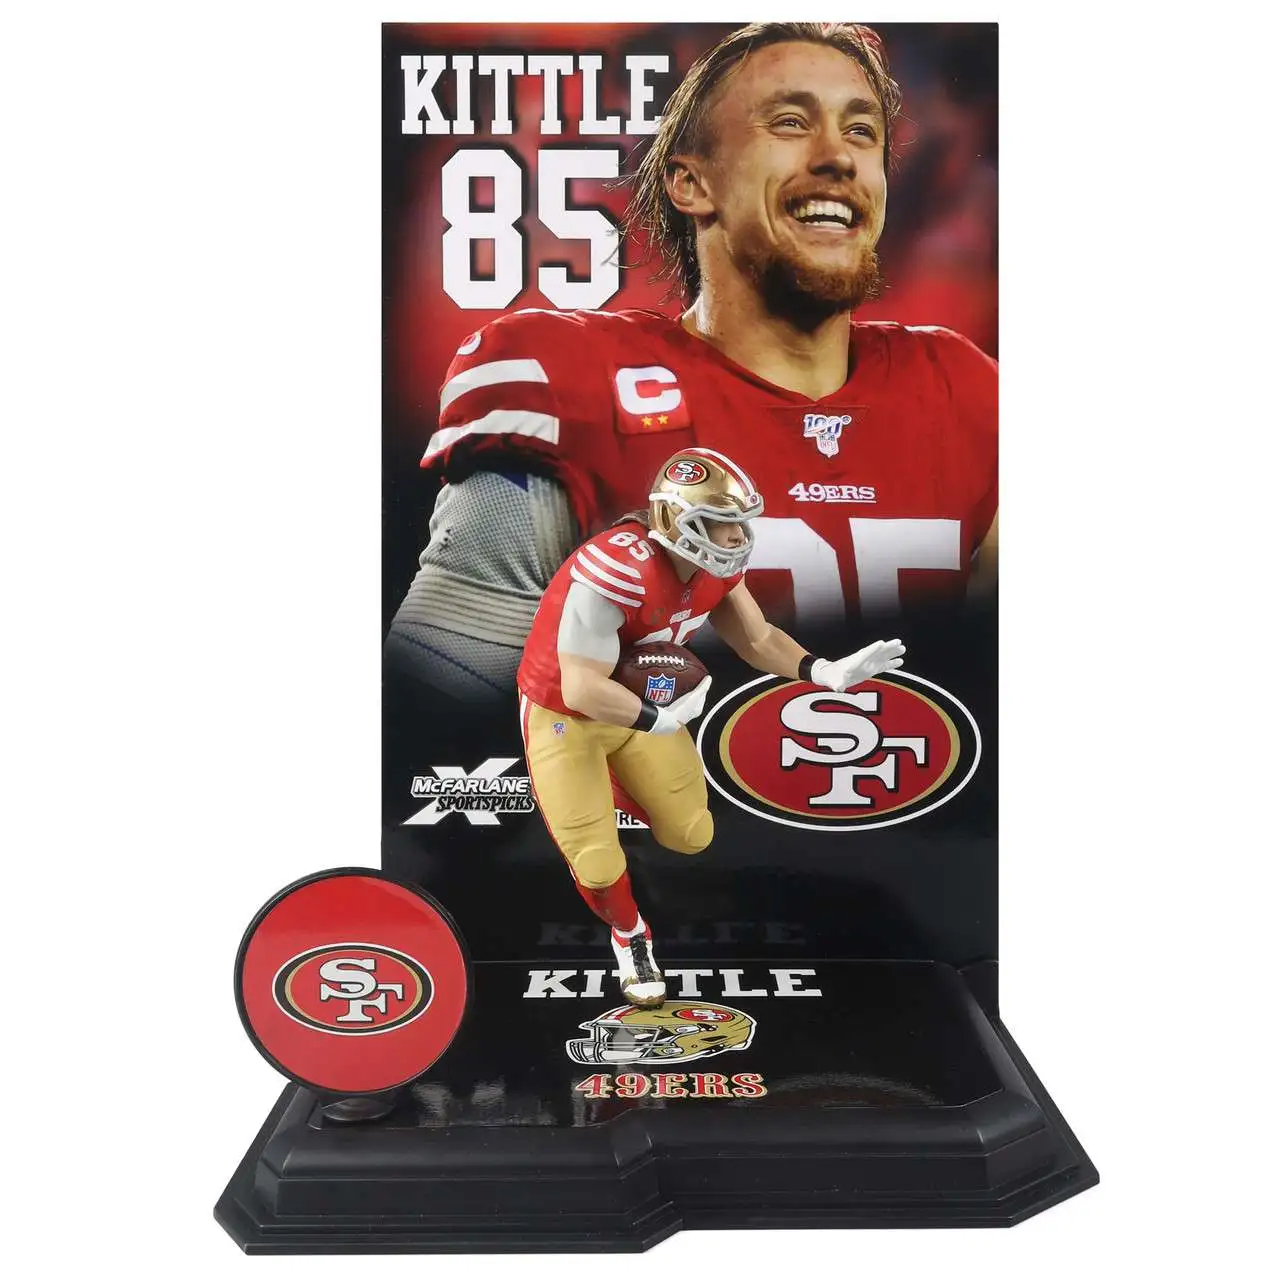 george kittle home jersey